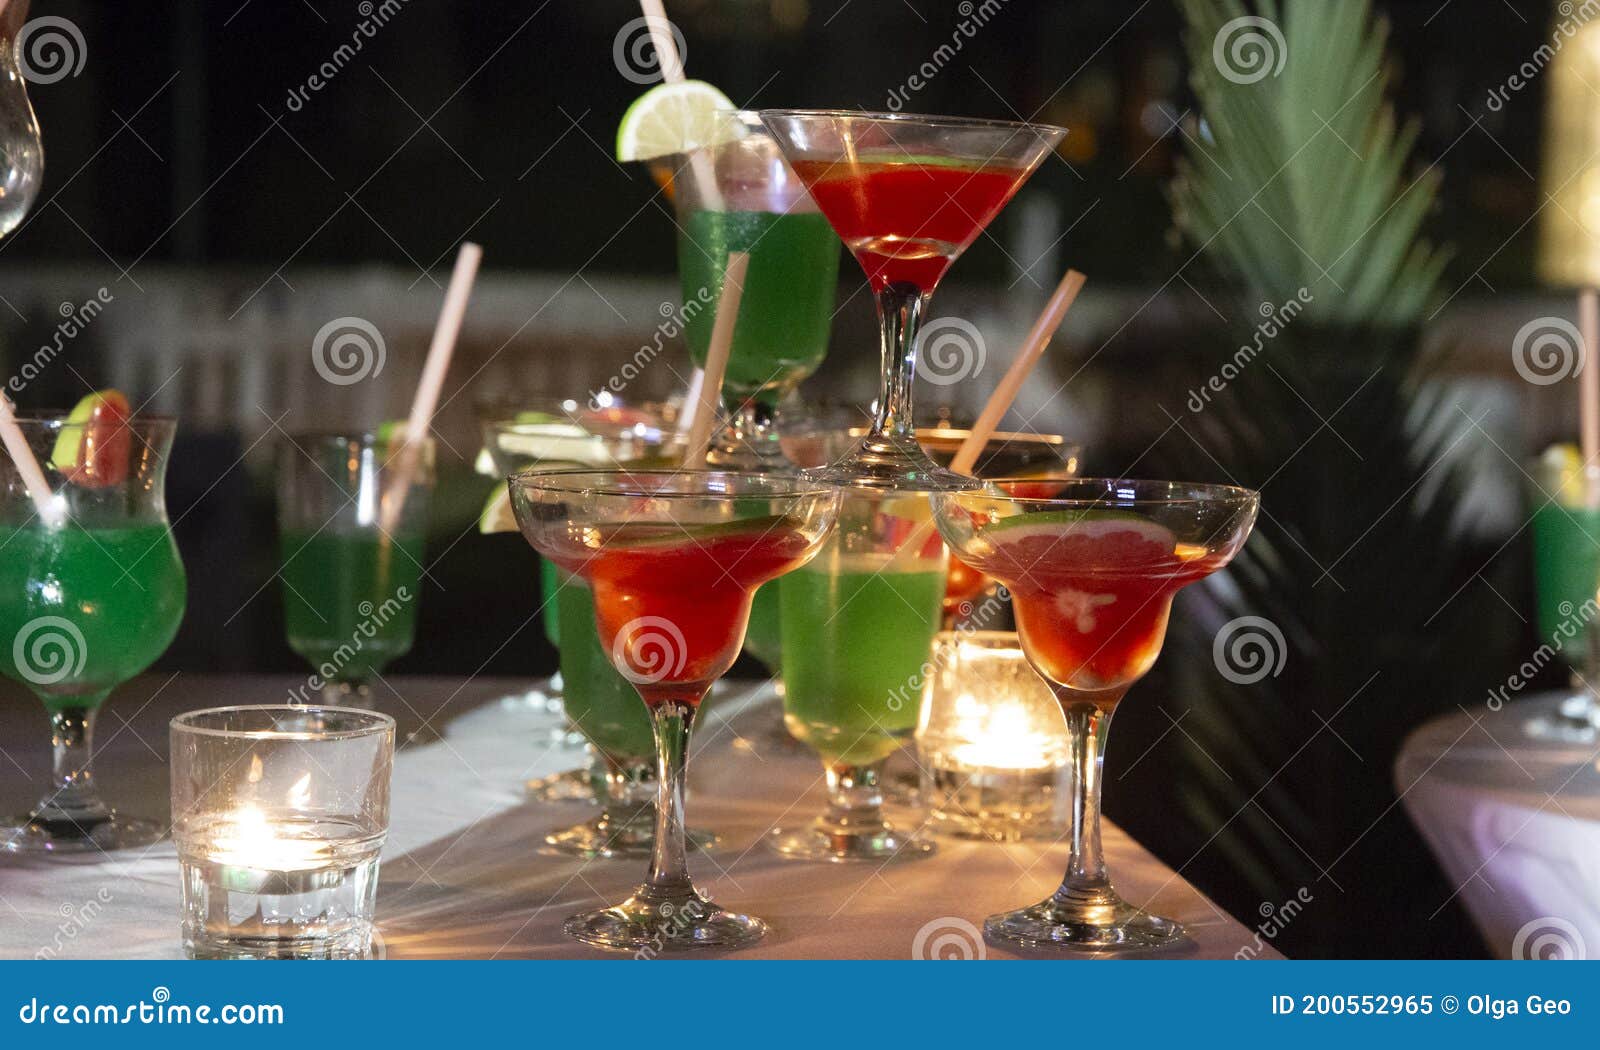 cocktails arranged in a pyramid party